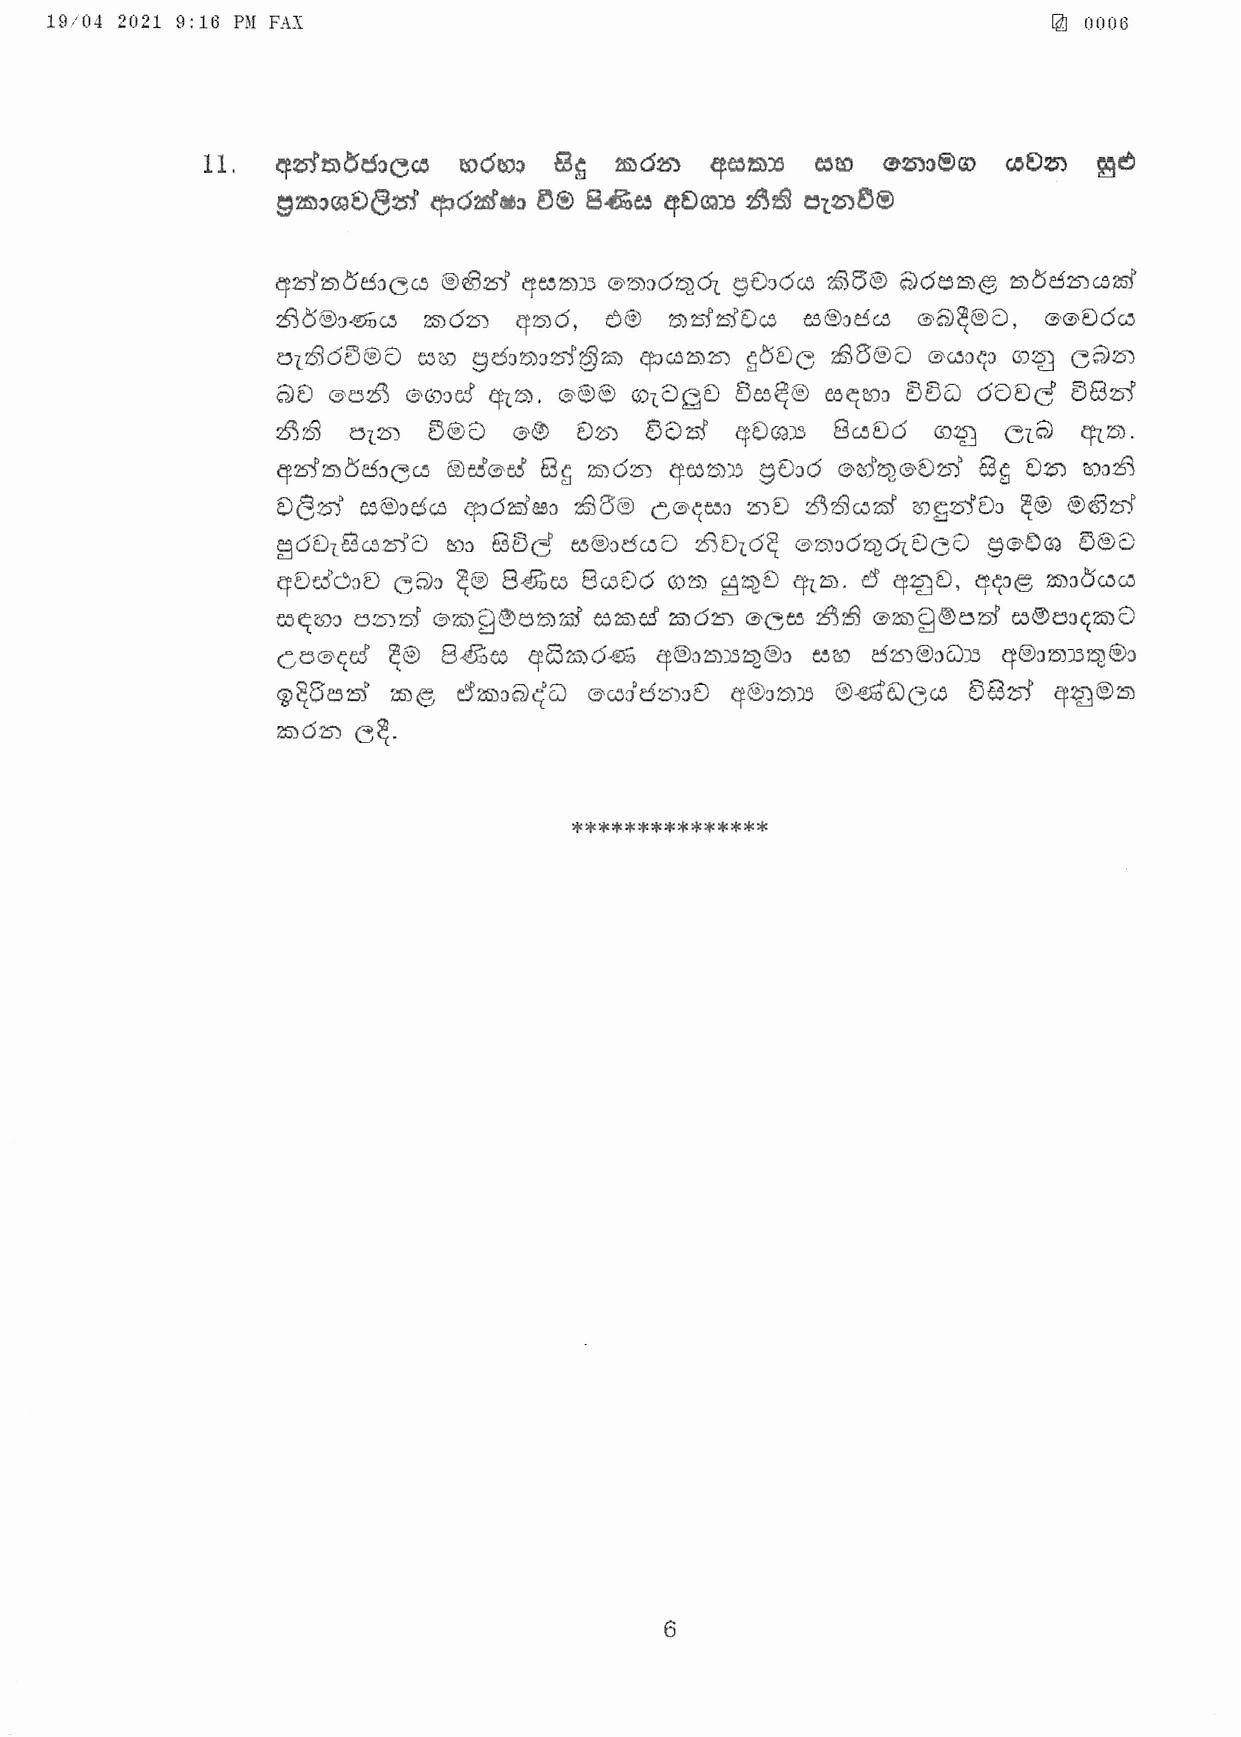 Cabinet Decision on 19.04.2021 page 006